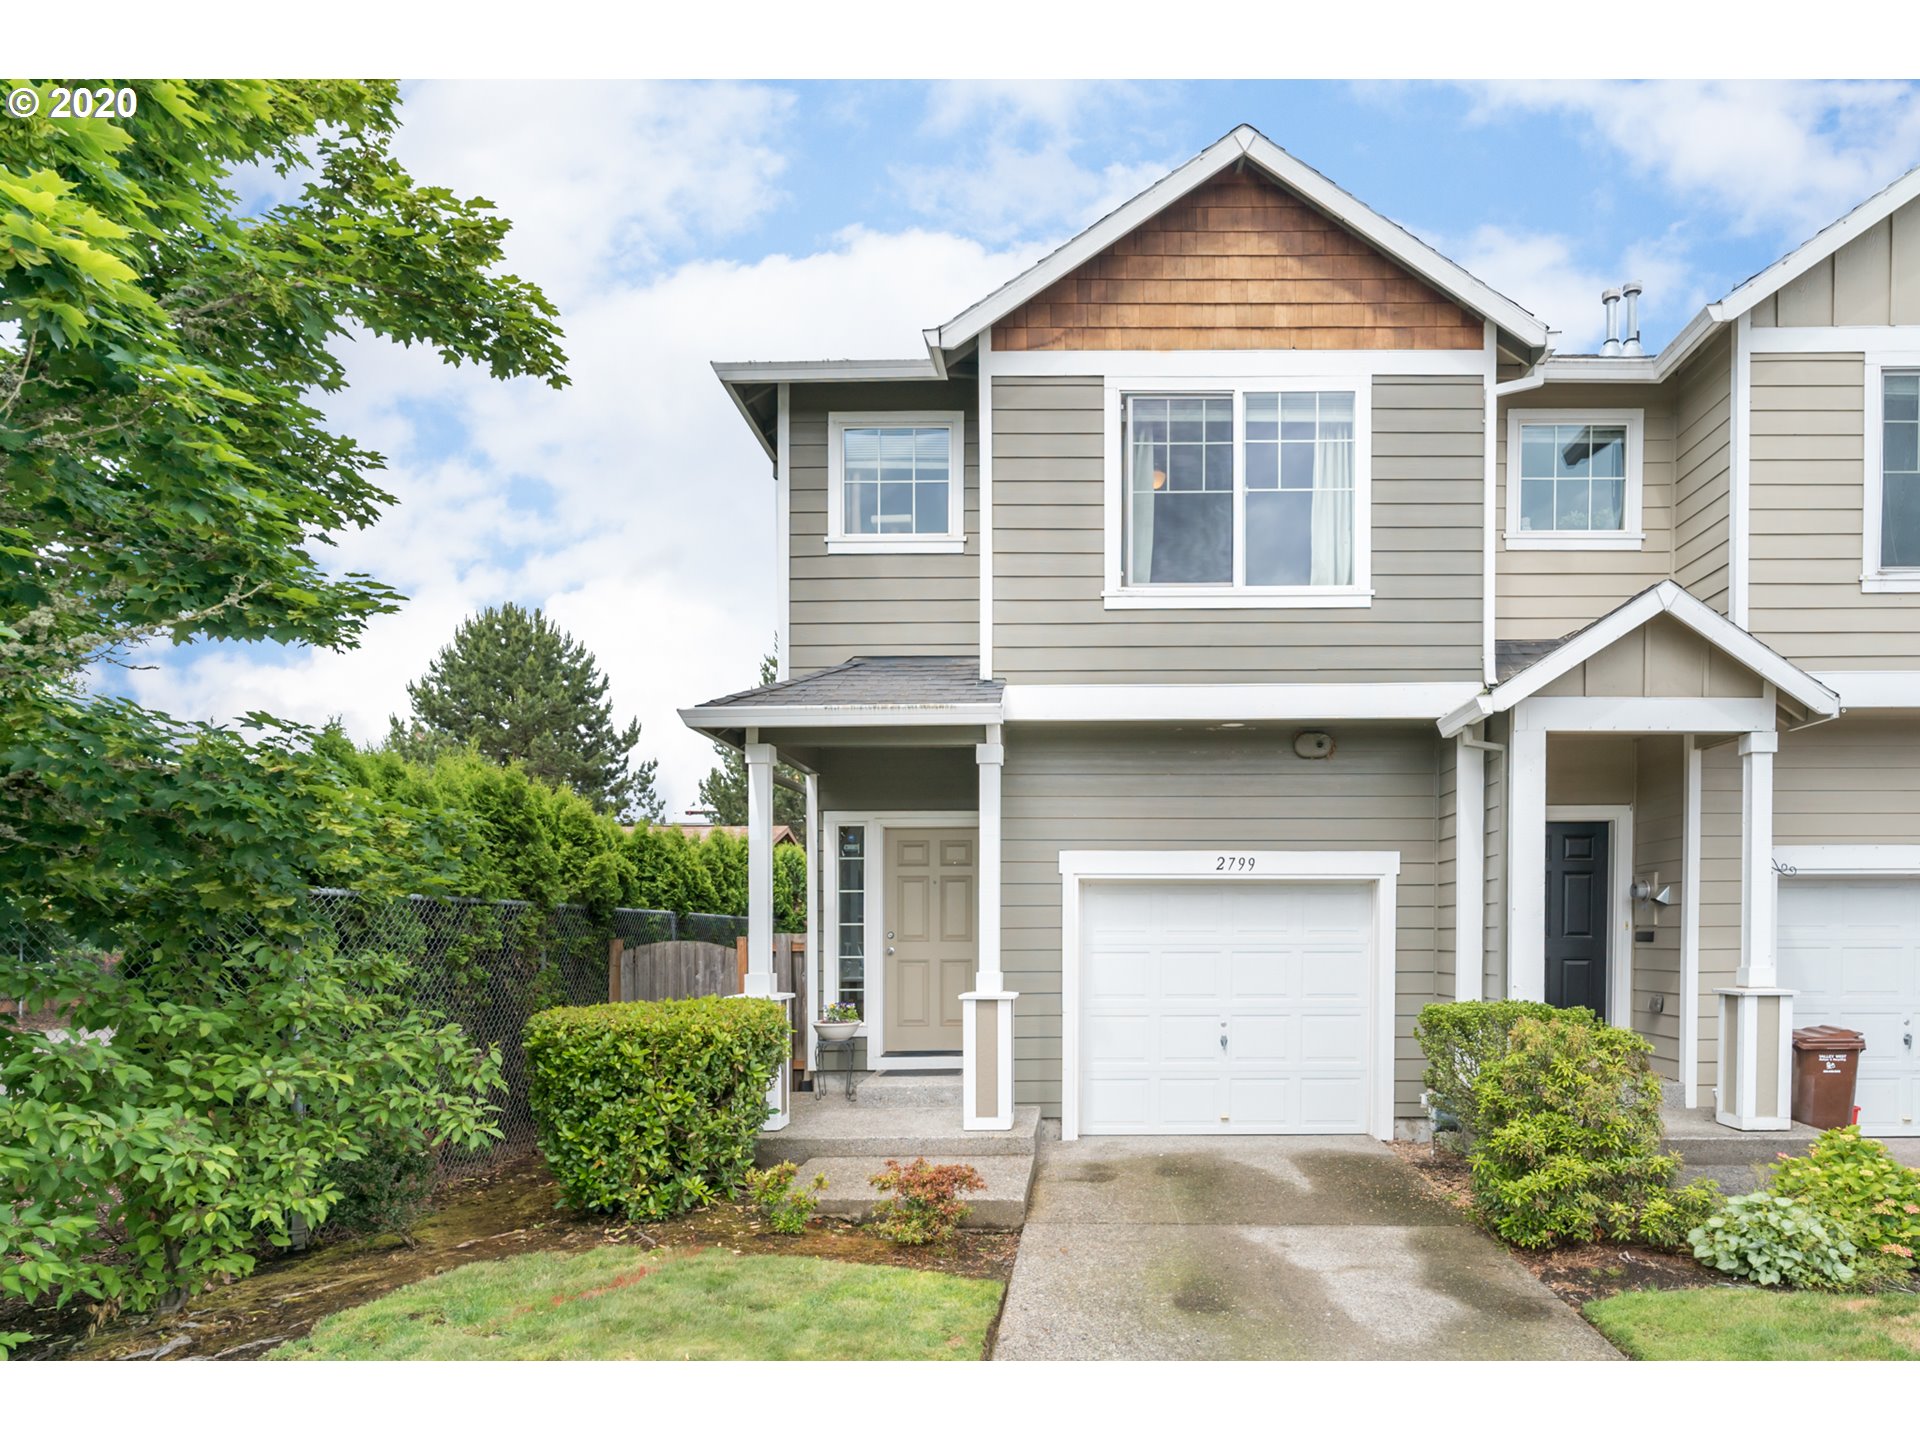 2799 SE 75TH AVE (1 of 25)